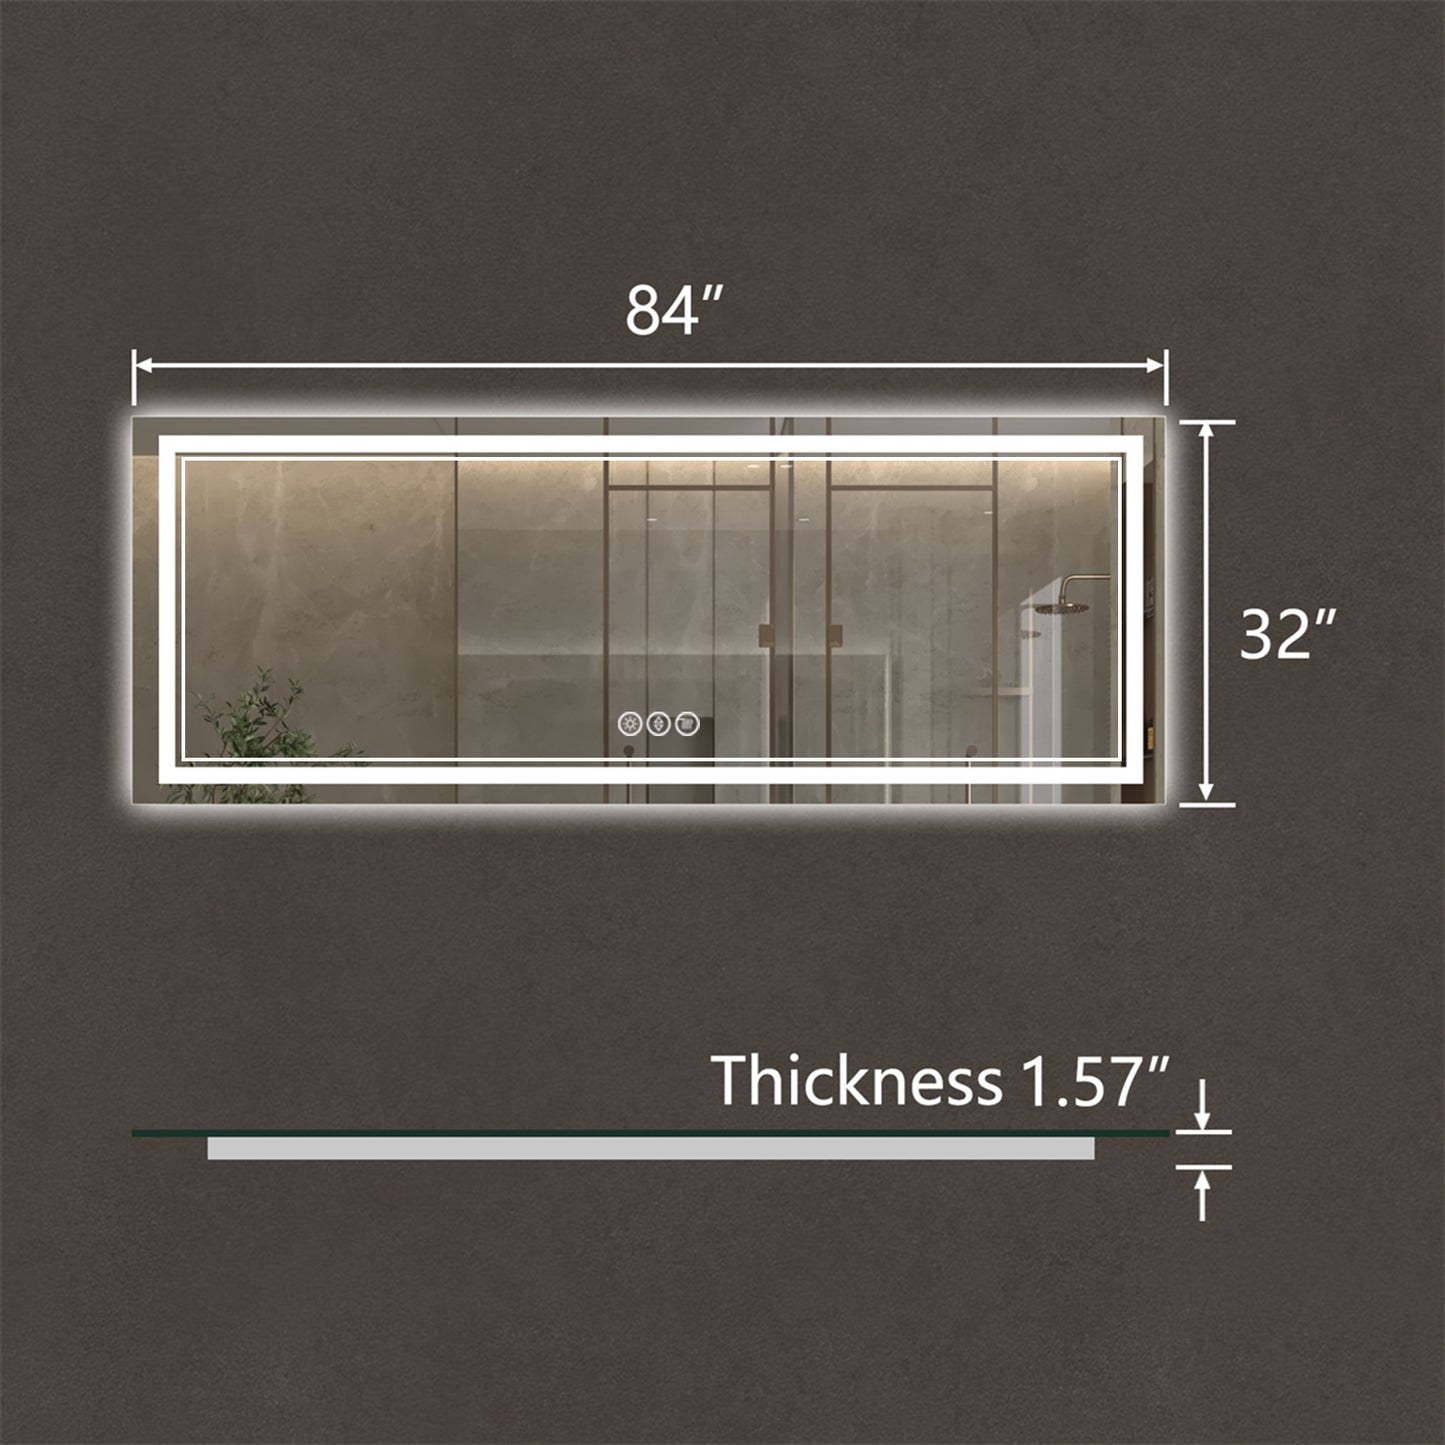 Linea 84" W x 32" H LED Heated Bathroom Mirror,Anti Fog,Dimmable,Front-Lighted and Backlit, Tempered Glass